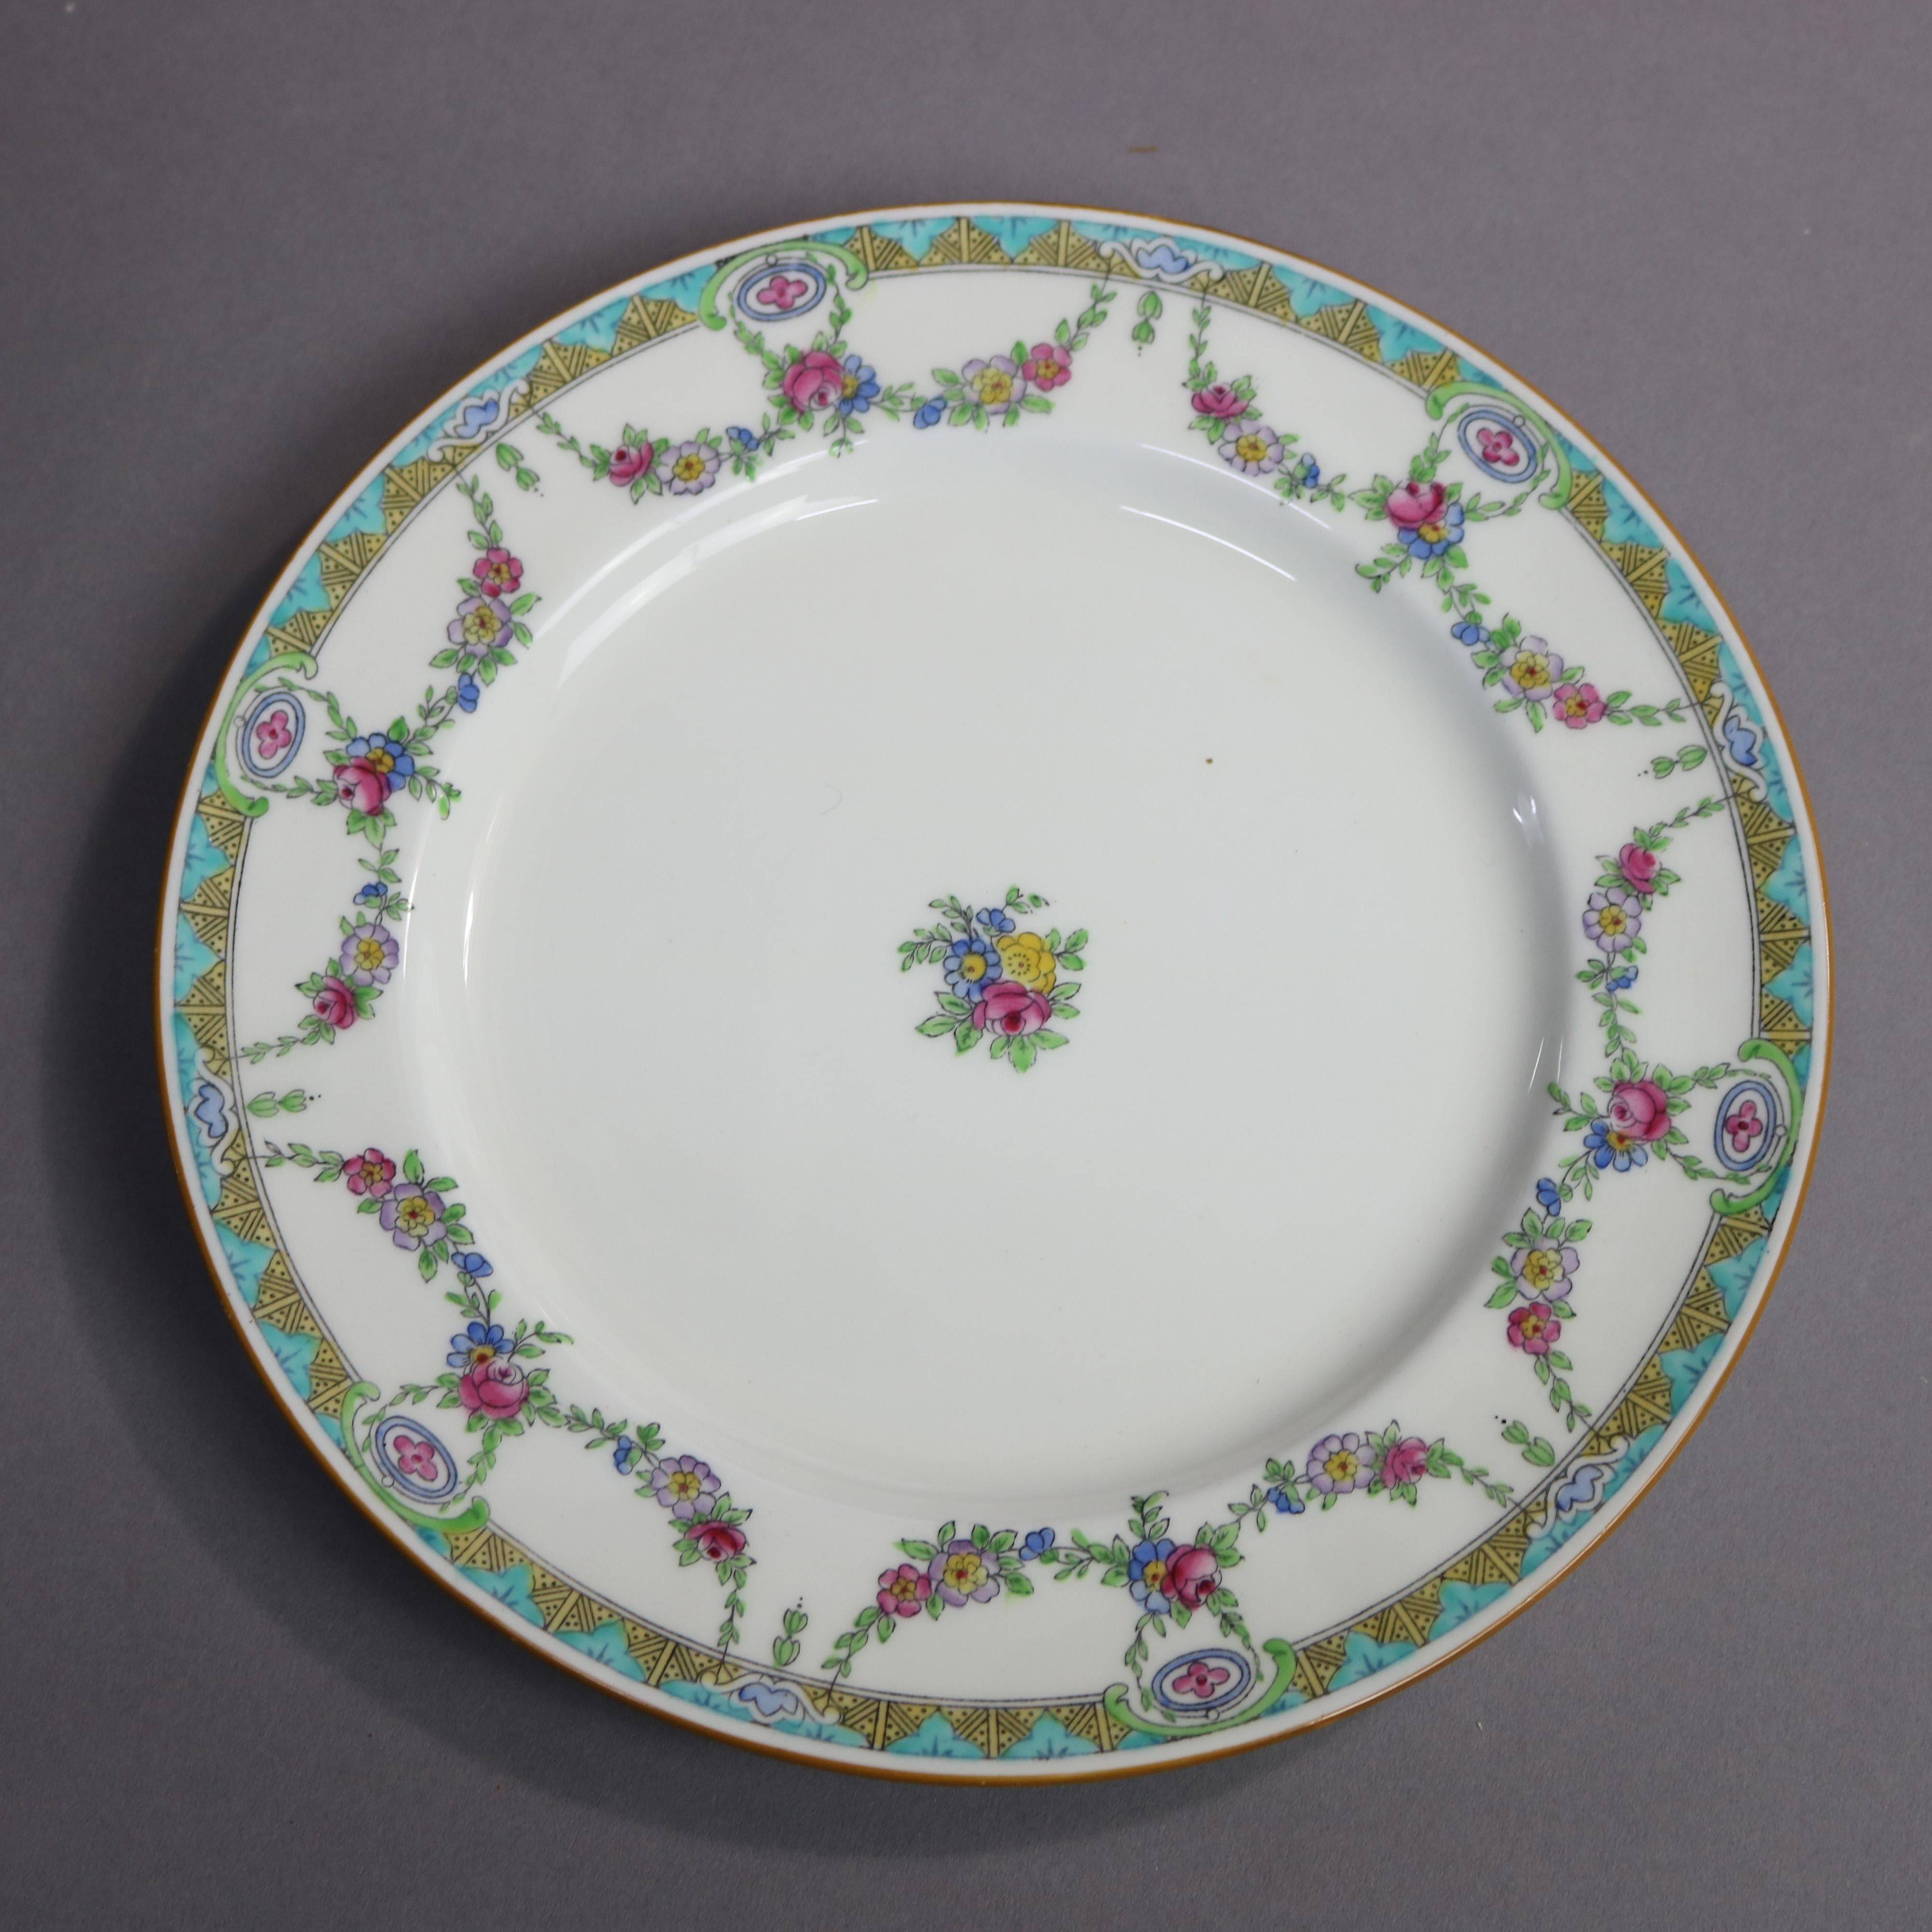 A set of 12 English Mintons Fine China salad plates feature rim with floral swag and stylized foliate border, central floral spray, en verso crown maker mark as photographed, 20th century

Measures- .75